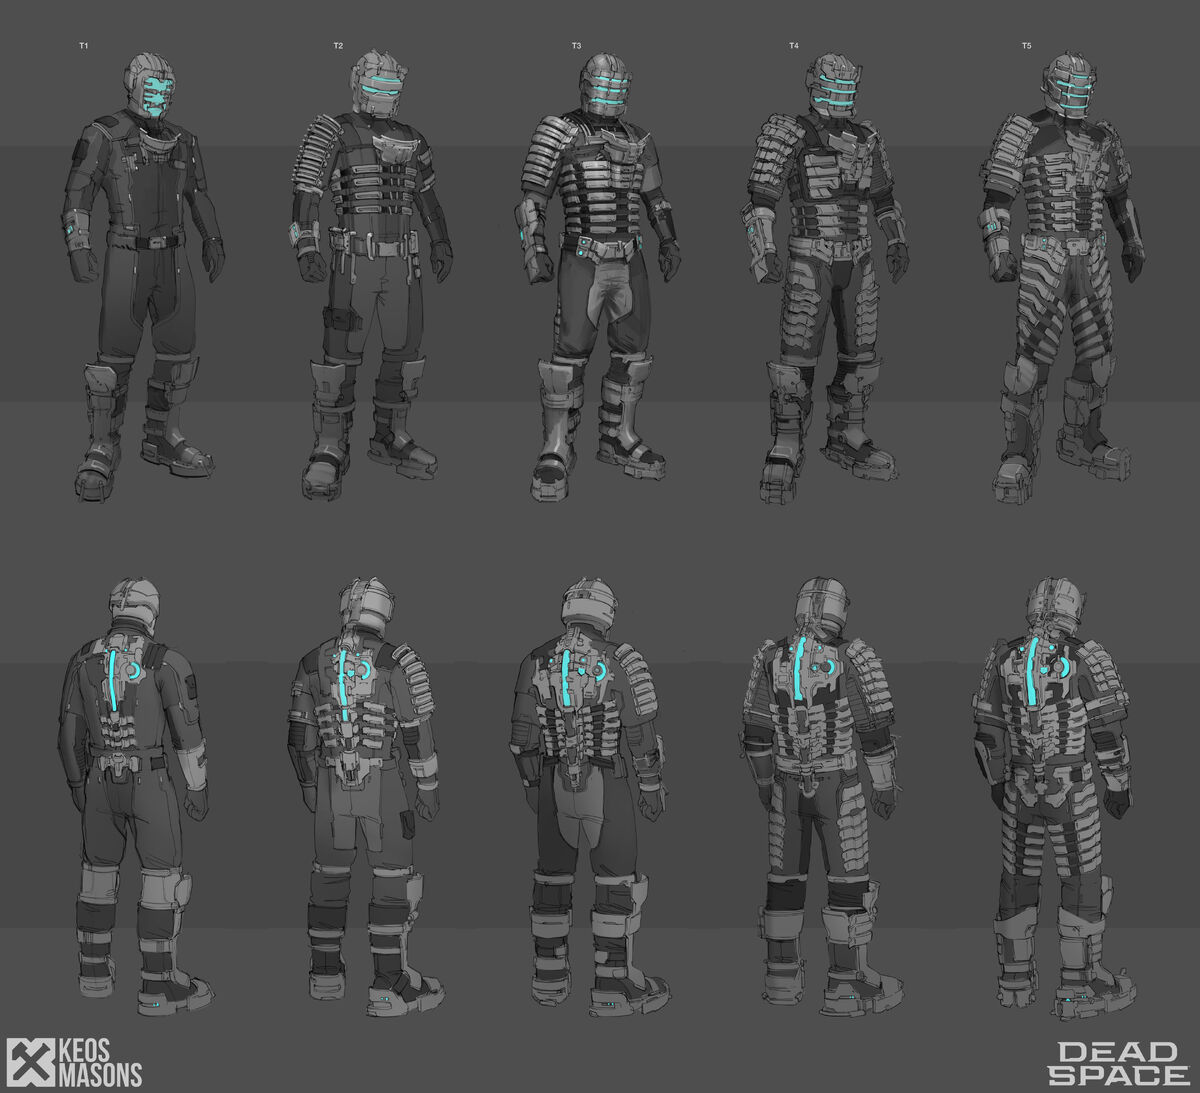 The change in suit design : r/DeadSpace